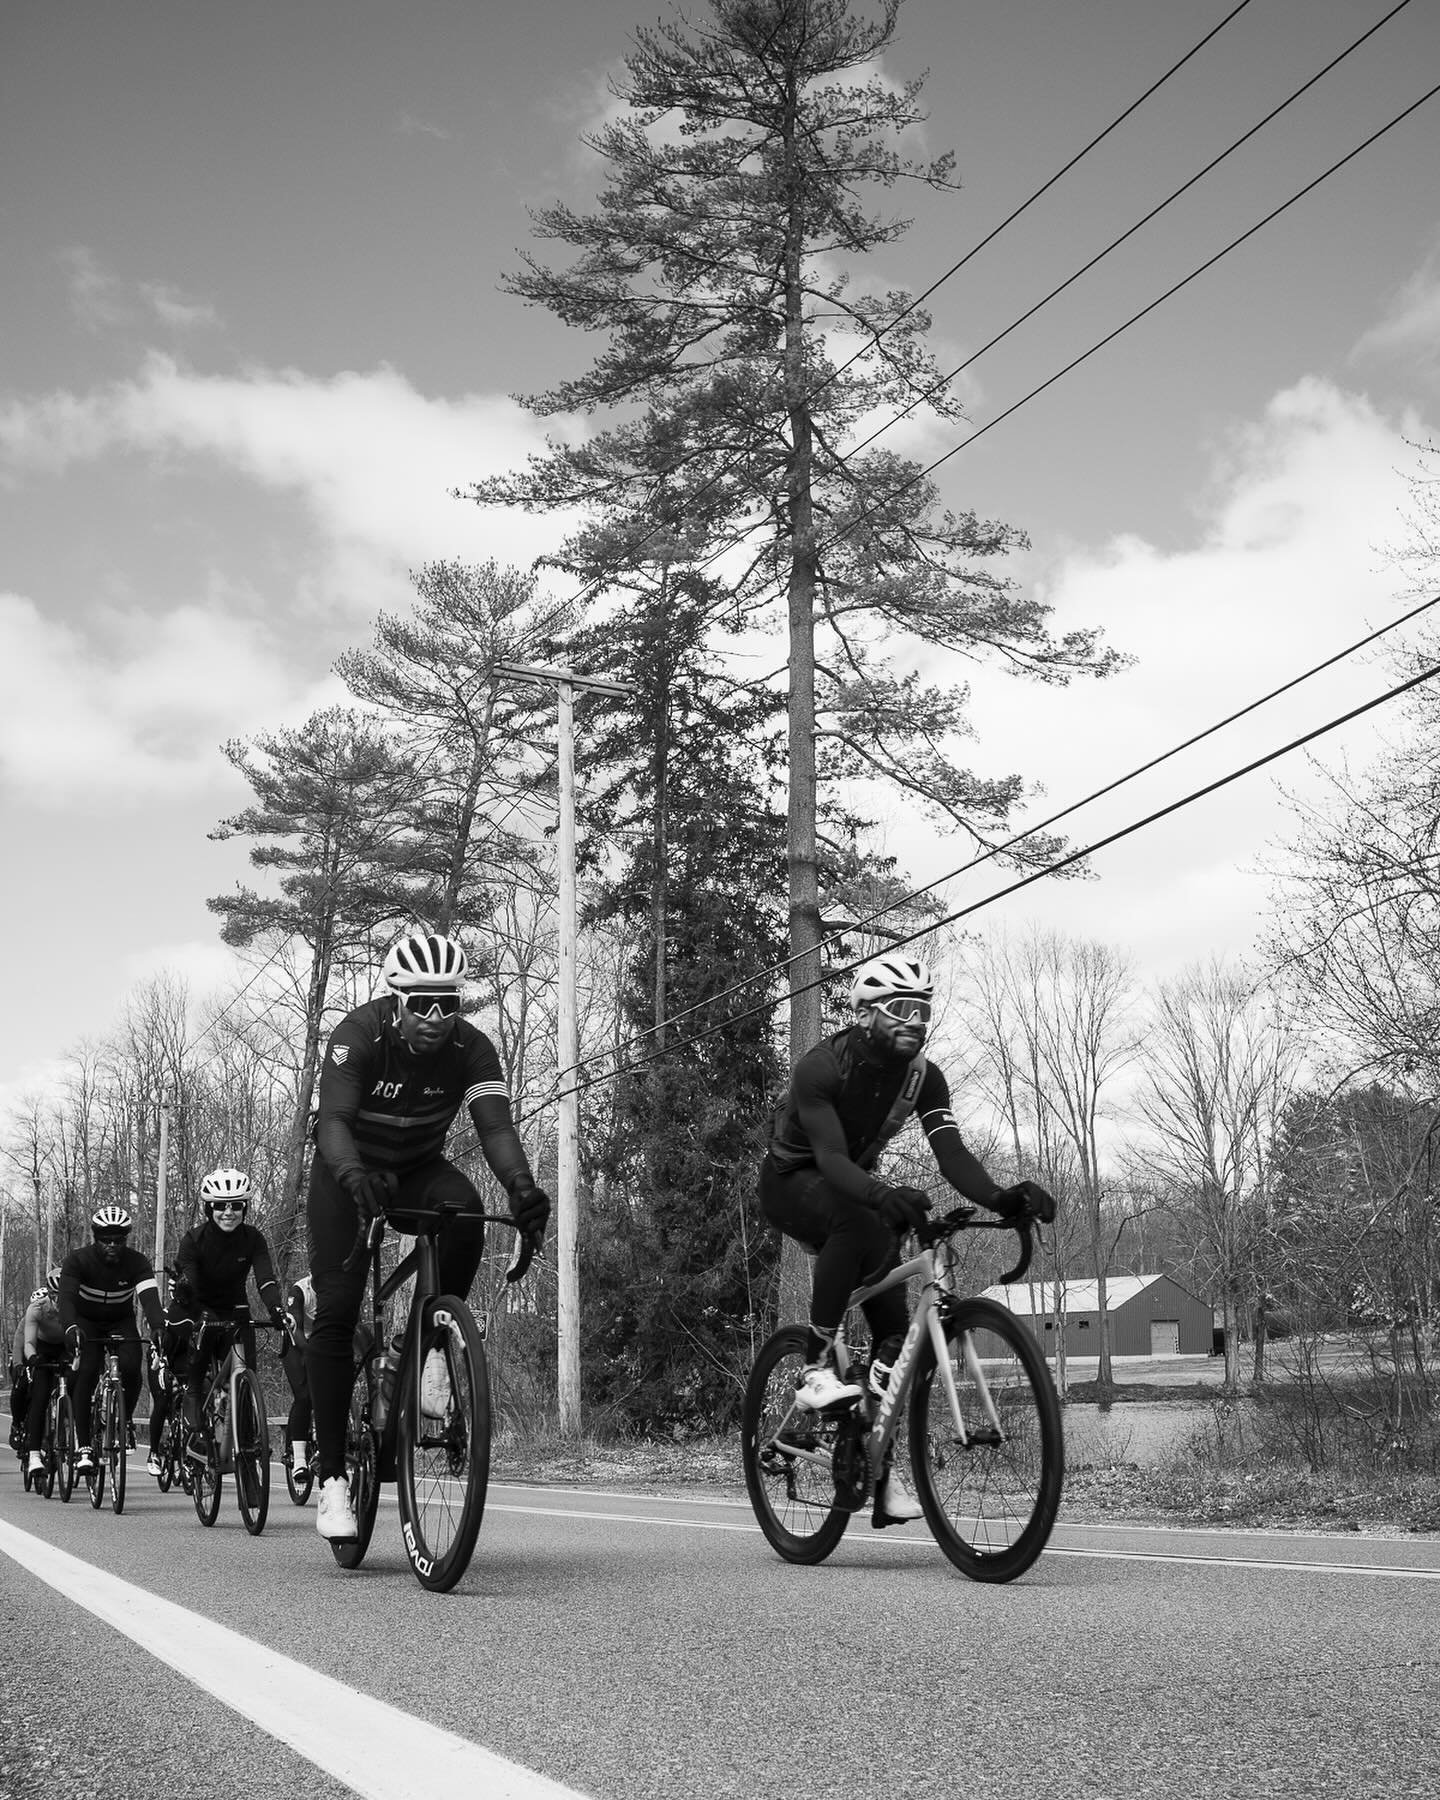 This Sunday 4/21. Join ACME, @rapha and @johnnyjhsu for 56 beautiful miles. 99.9% paved road / 4400 ft of climbing / start and ends at ACME / water + food stop at mile 40. &nbsp;City folks - take Metro North to Katonah or drive up. Meeting at 9:30am,